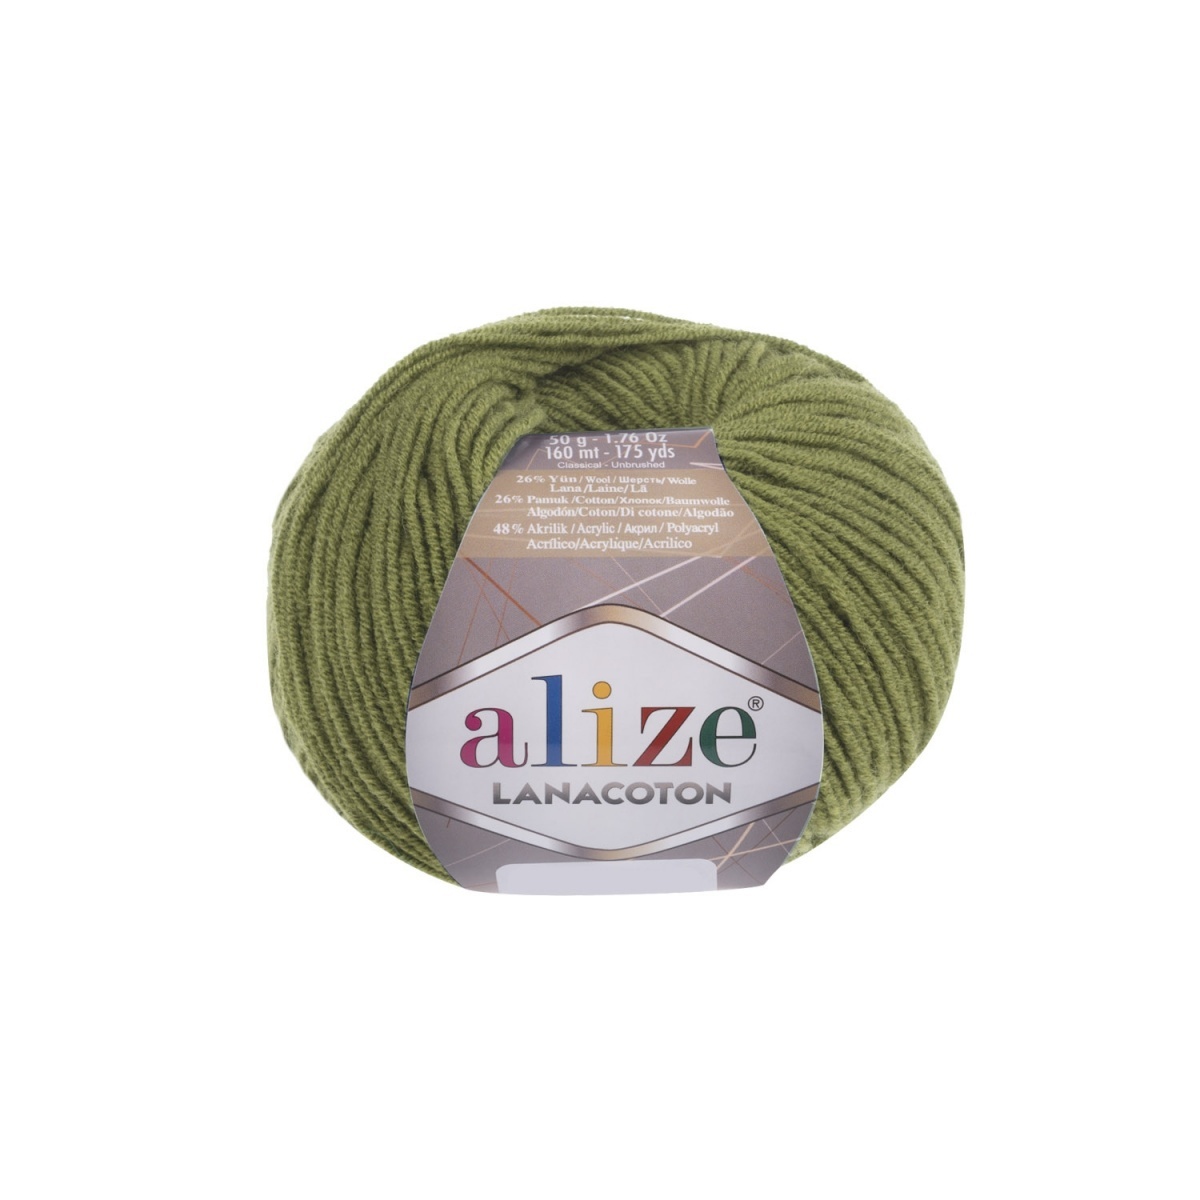 Alize Lanacoton, 26% wool, 26% cotton, 48% acrylic 10 Skein Value Pack, 500g фото 1